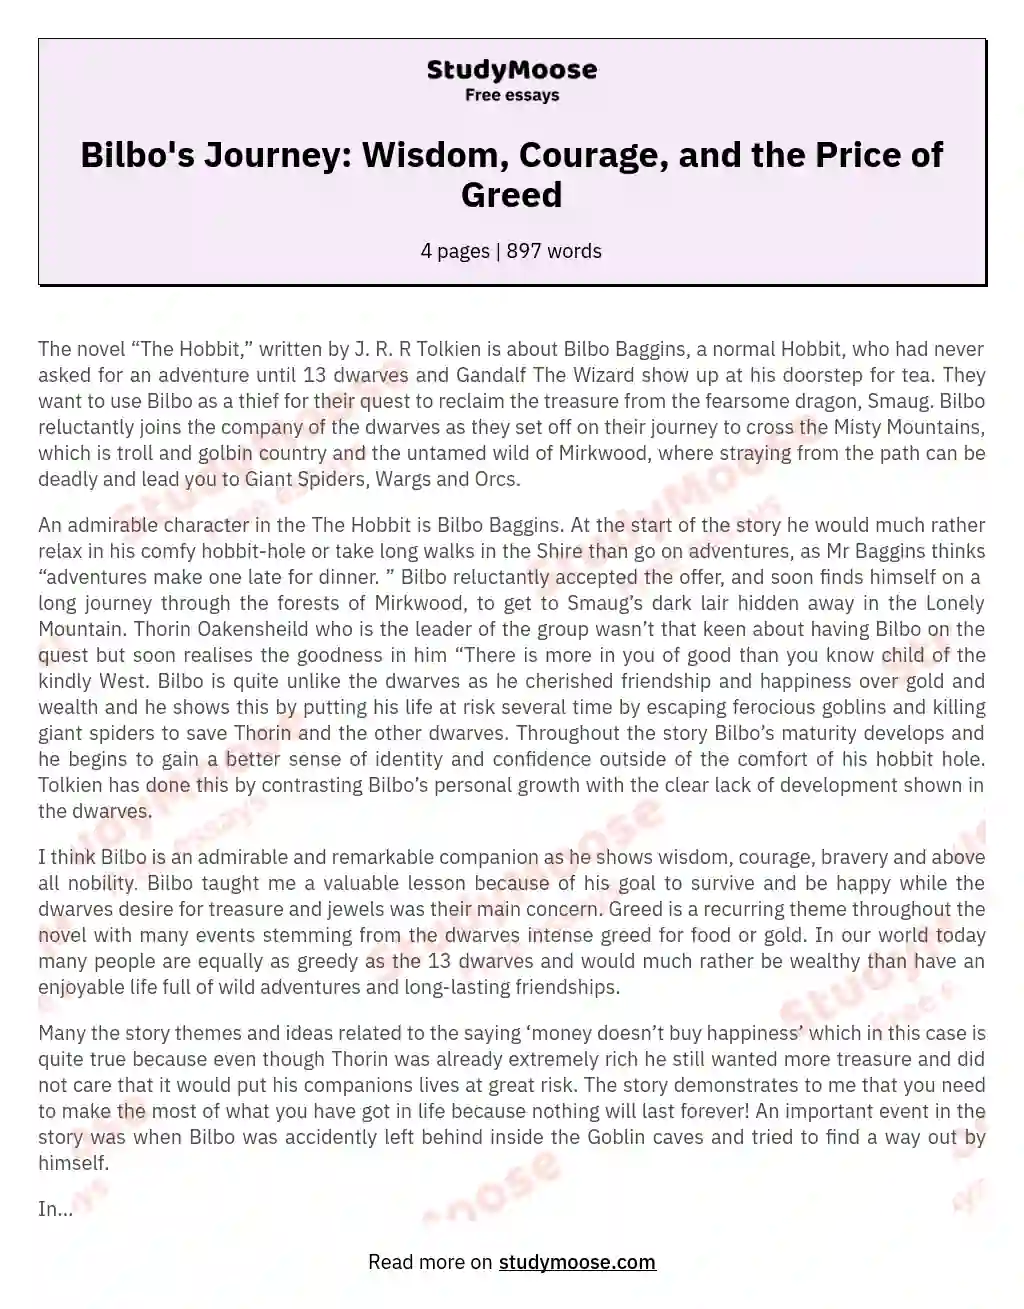 Bilbo's Journey: Wisdom, Courage, and the Price of Greed essay